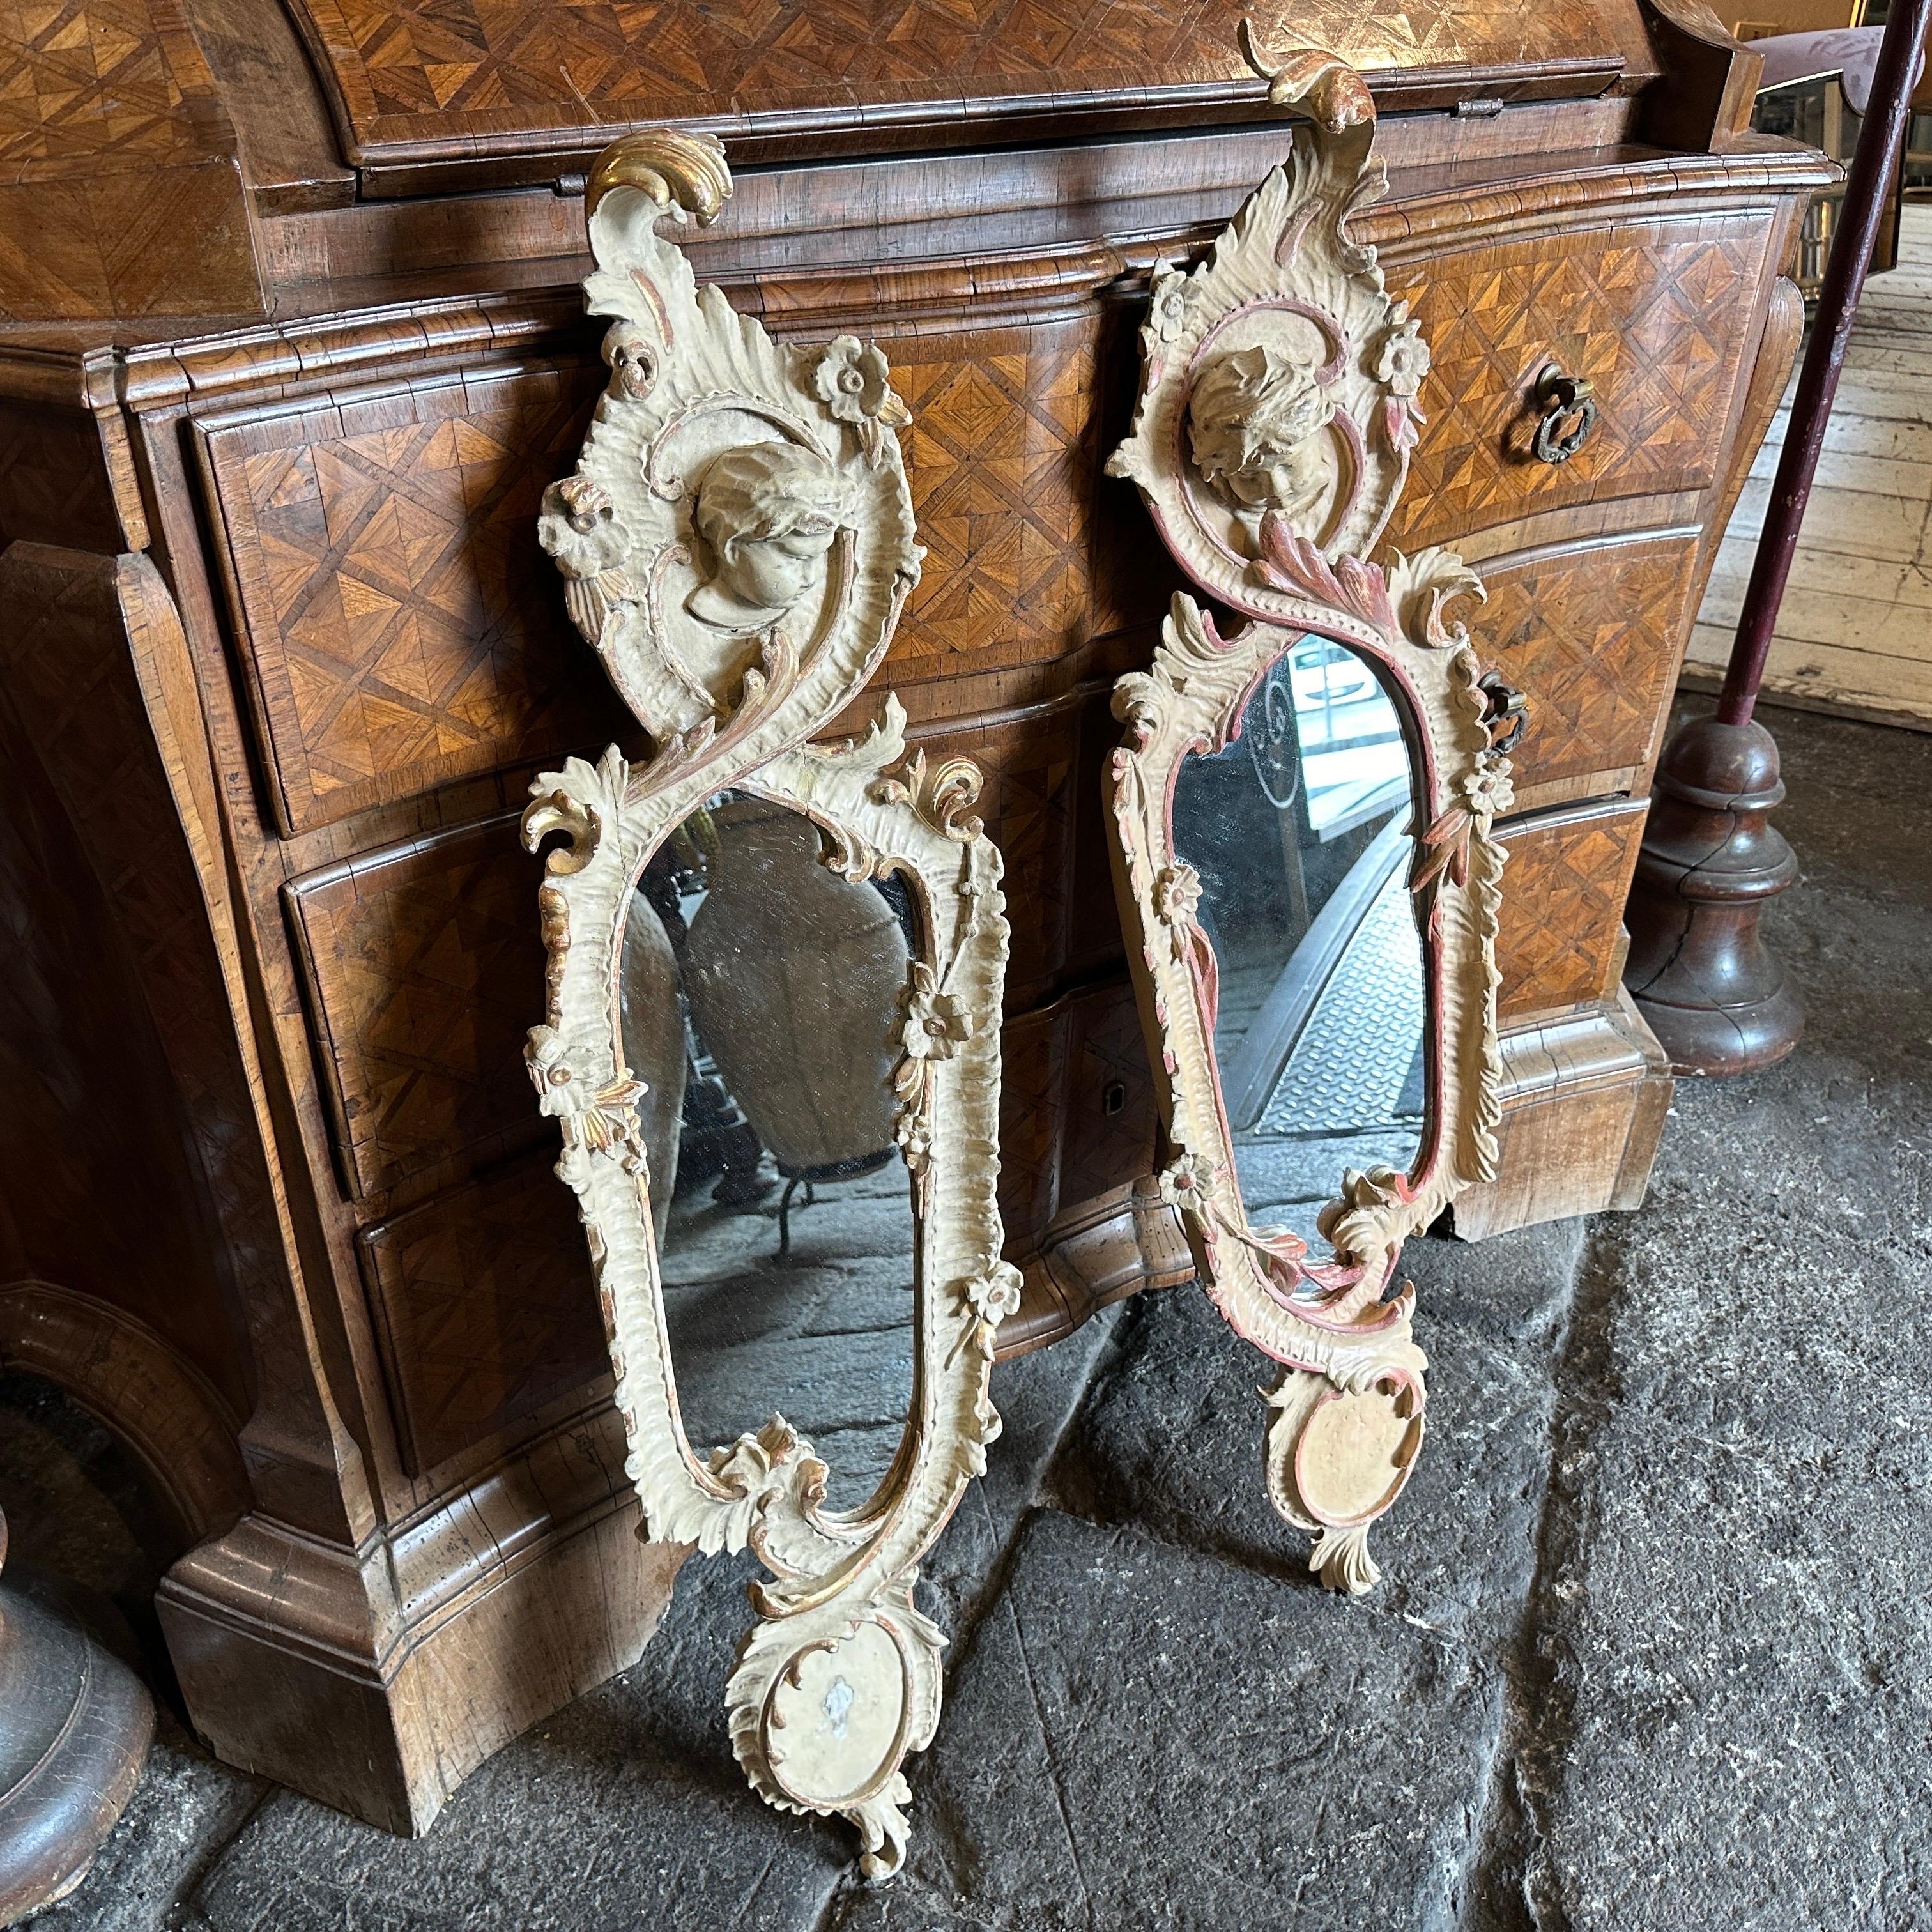 This set of two 1900s Art Nouveau hand-carved wood Italian wall mirrors is an exceptional example of artistic and functional design, the combination of intricate carvings, fluid organic shapes, and a luxurious lacquered finish would showcase the